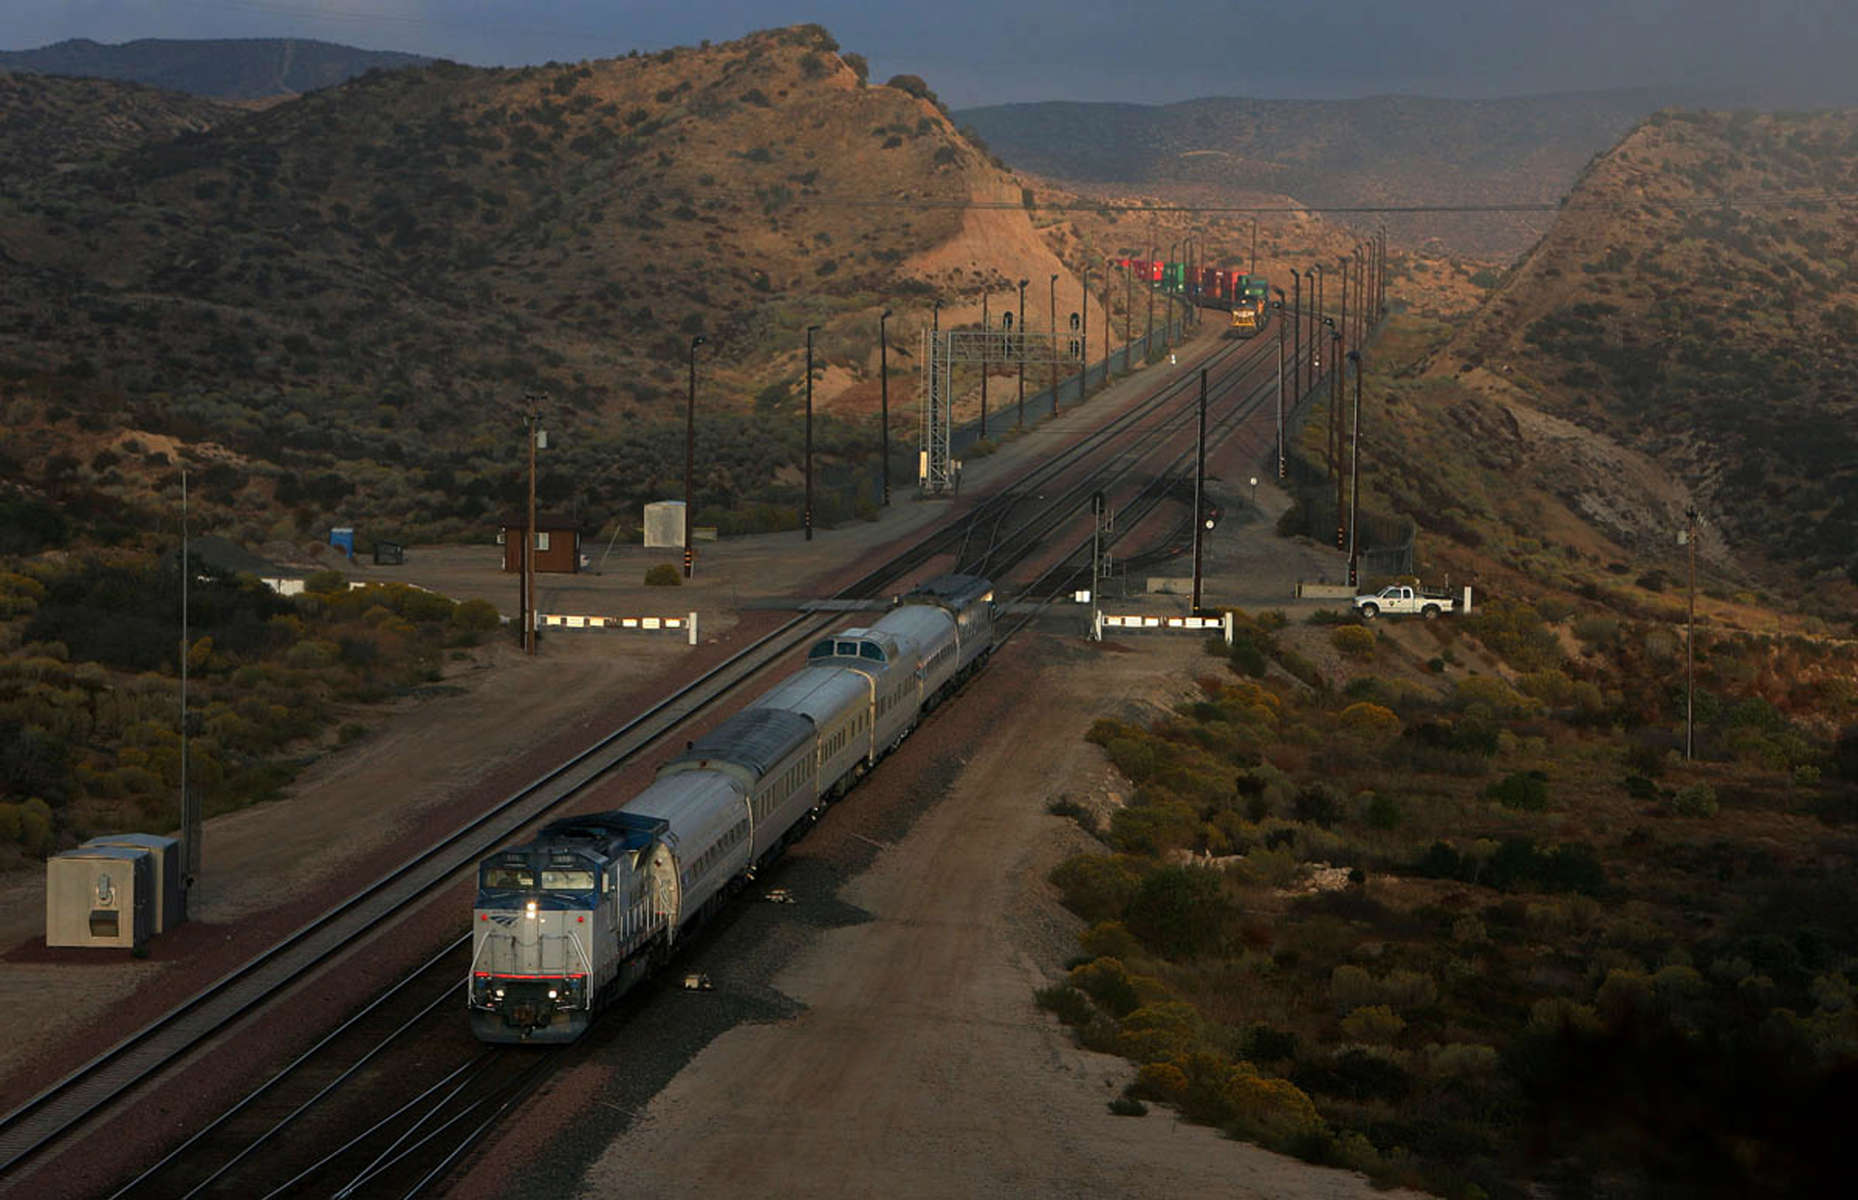 The Kelso Flyer passenger train runs between Barstow and Kelso, Calif., traveling through the scenic Mojave Desert. Officials hope to make it a regular rail service. (The Press-Enterprise/ Mark Zaleski)